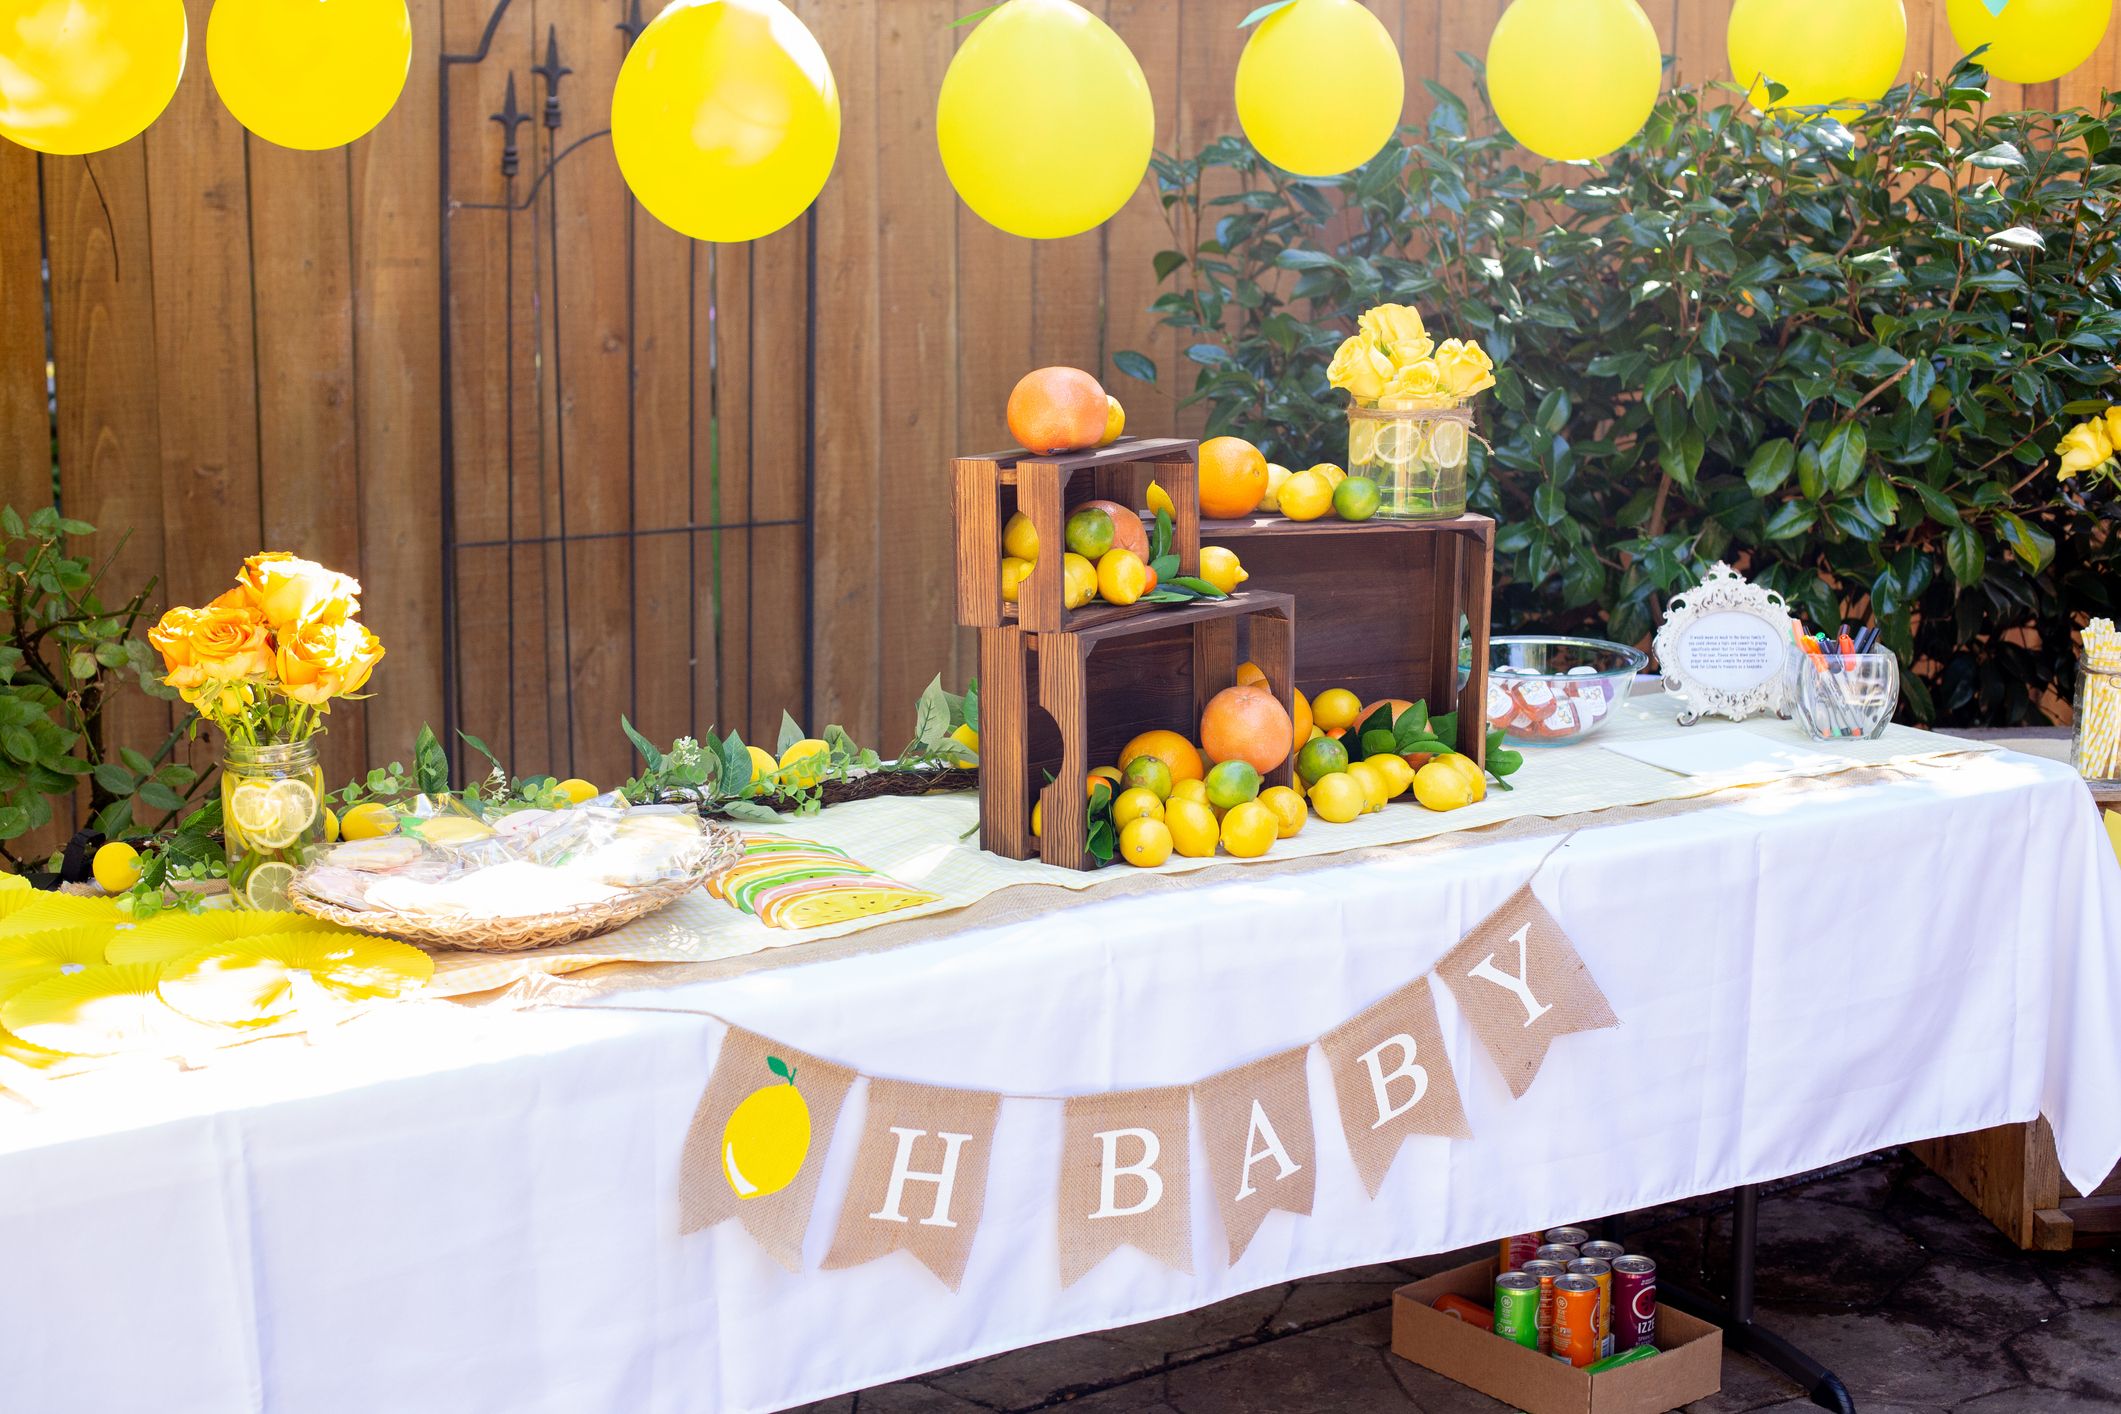 50 Best Baby Shower Ideas Top, Ideas To Decorate Tables For Baby Shower